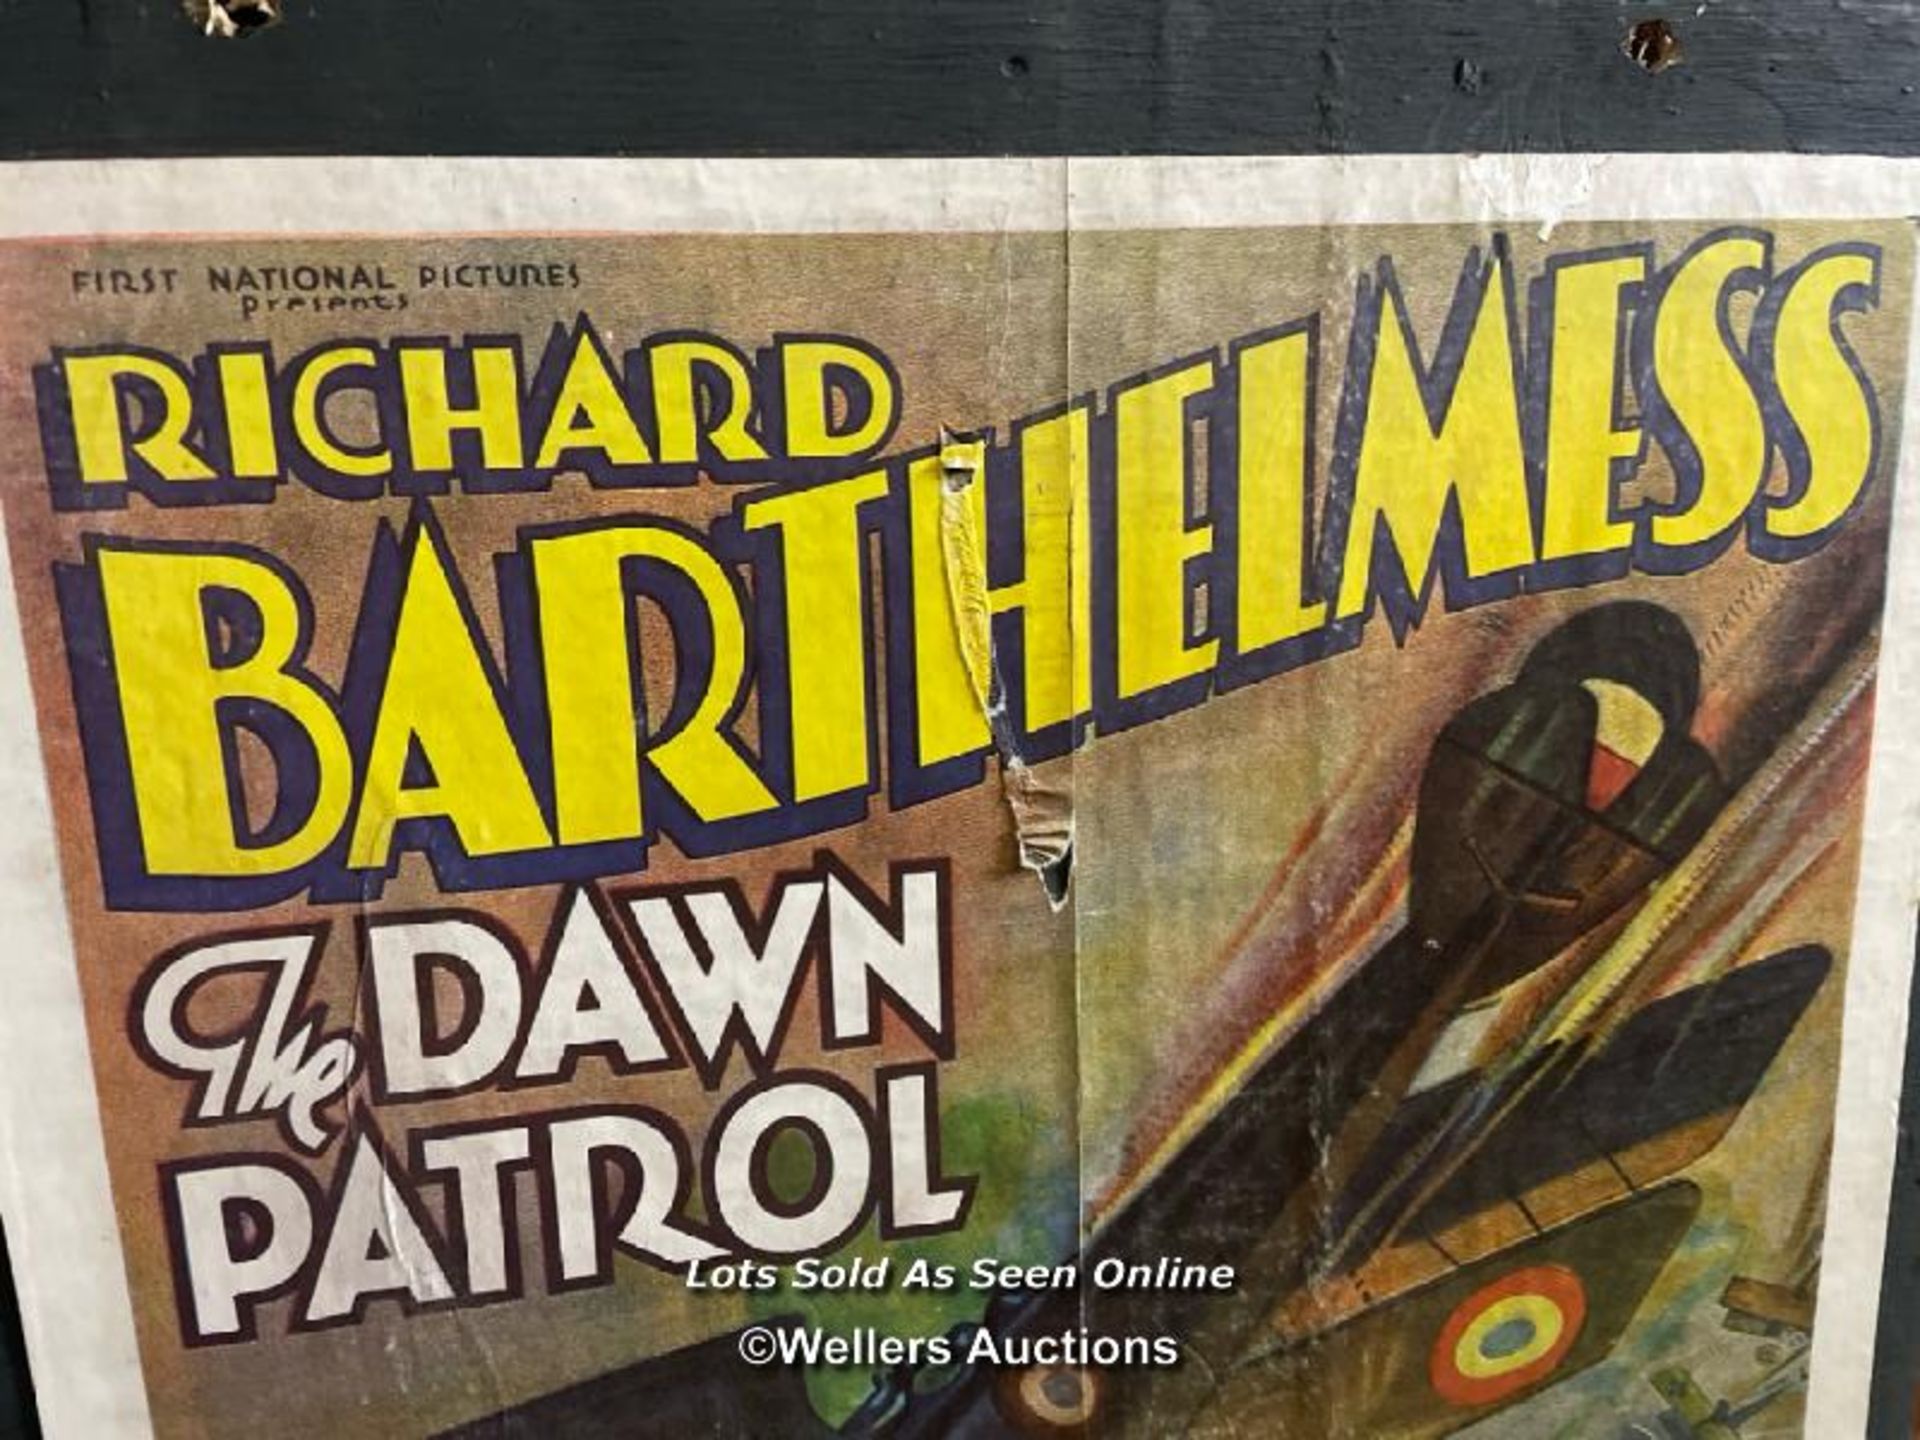 'THE DAWN PATROL' FILM POSTER, 1930, PASTED ONTO BOARD FOR THEATRICAL USE, POSTER SIZE 50 X 73.5CM - Image 2 of 4